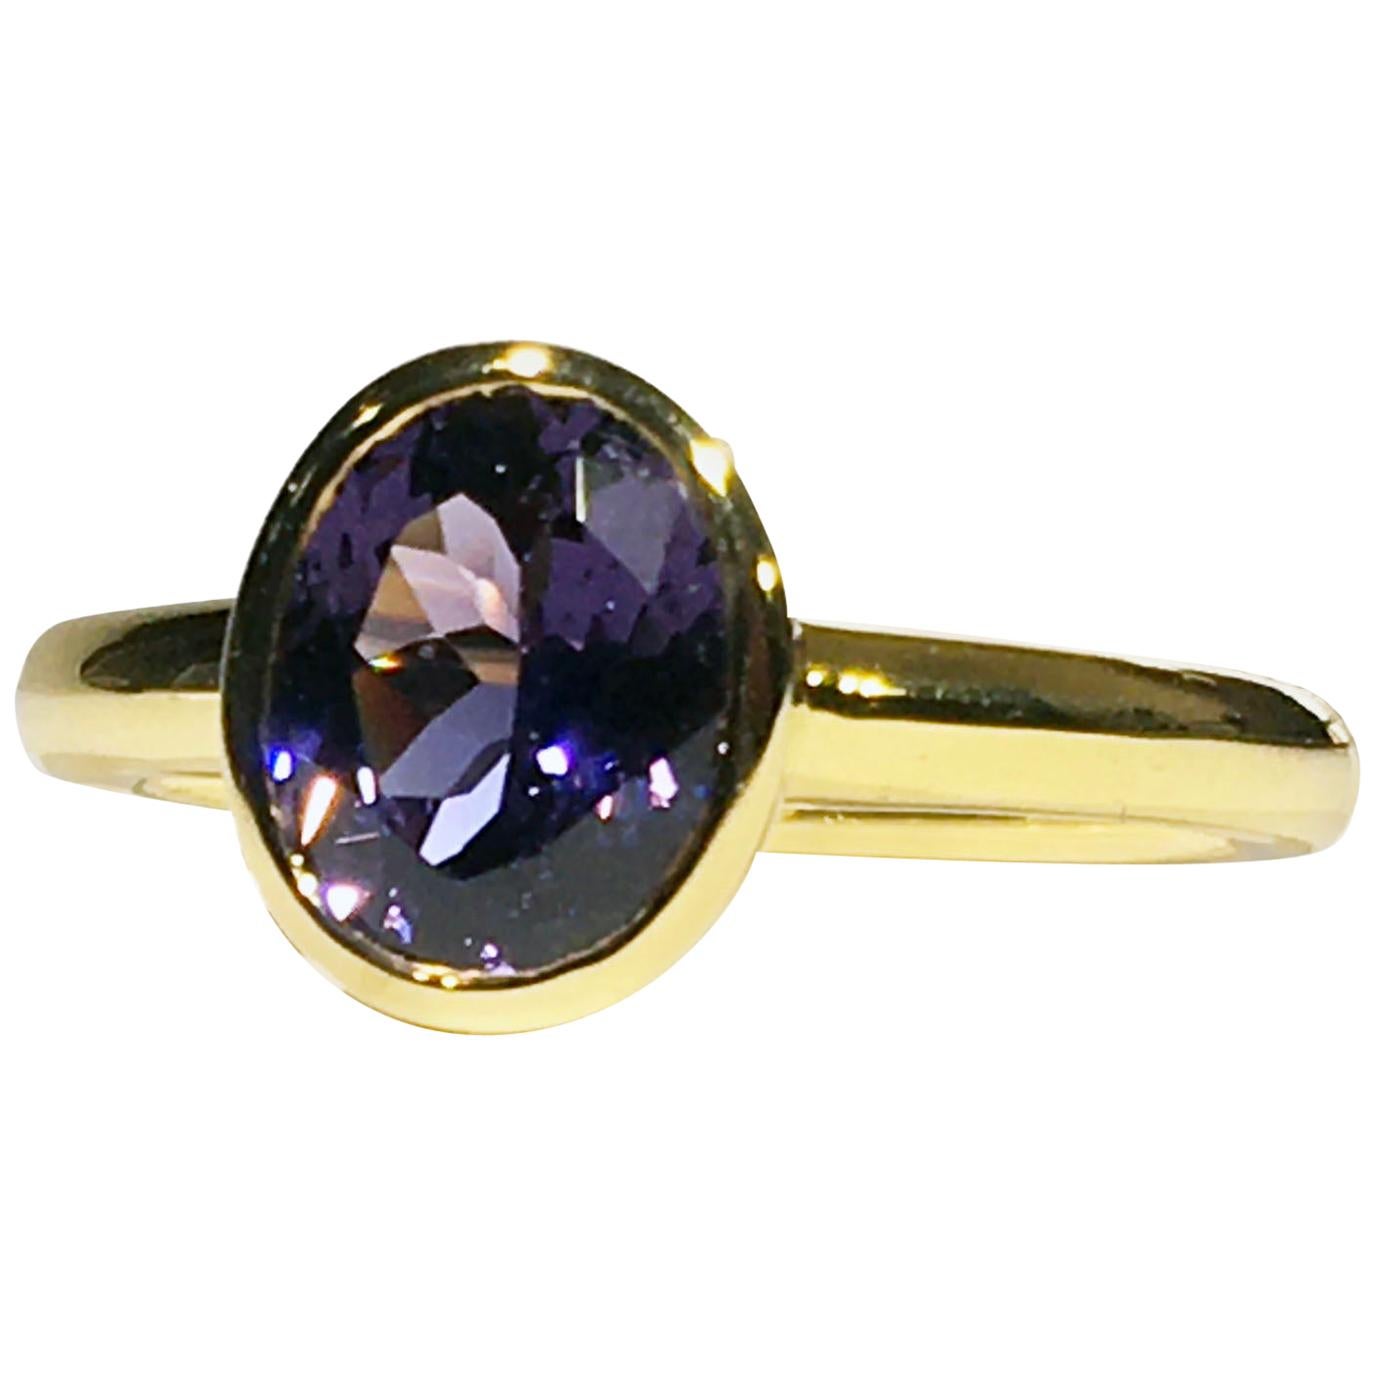 A Kary Adam Designed Purple Spinel Ring Set in 14 Karat Yellow Gold For Sale